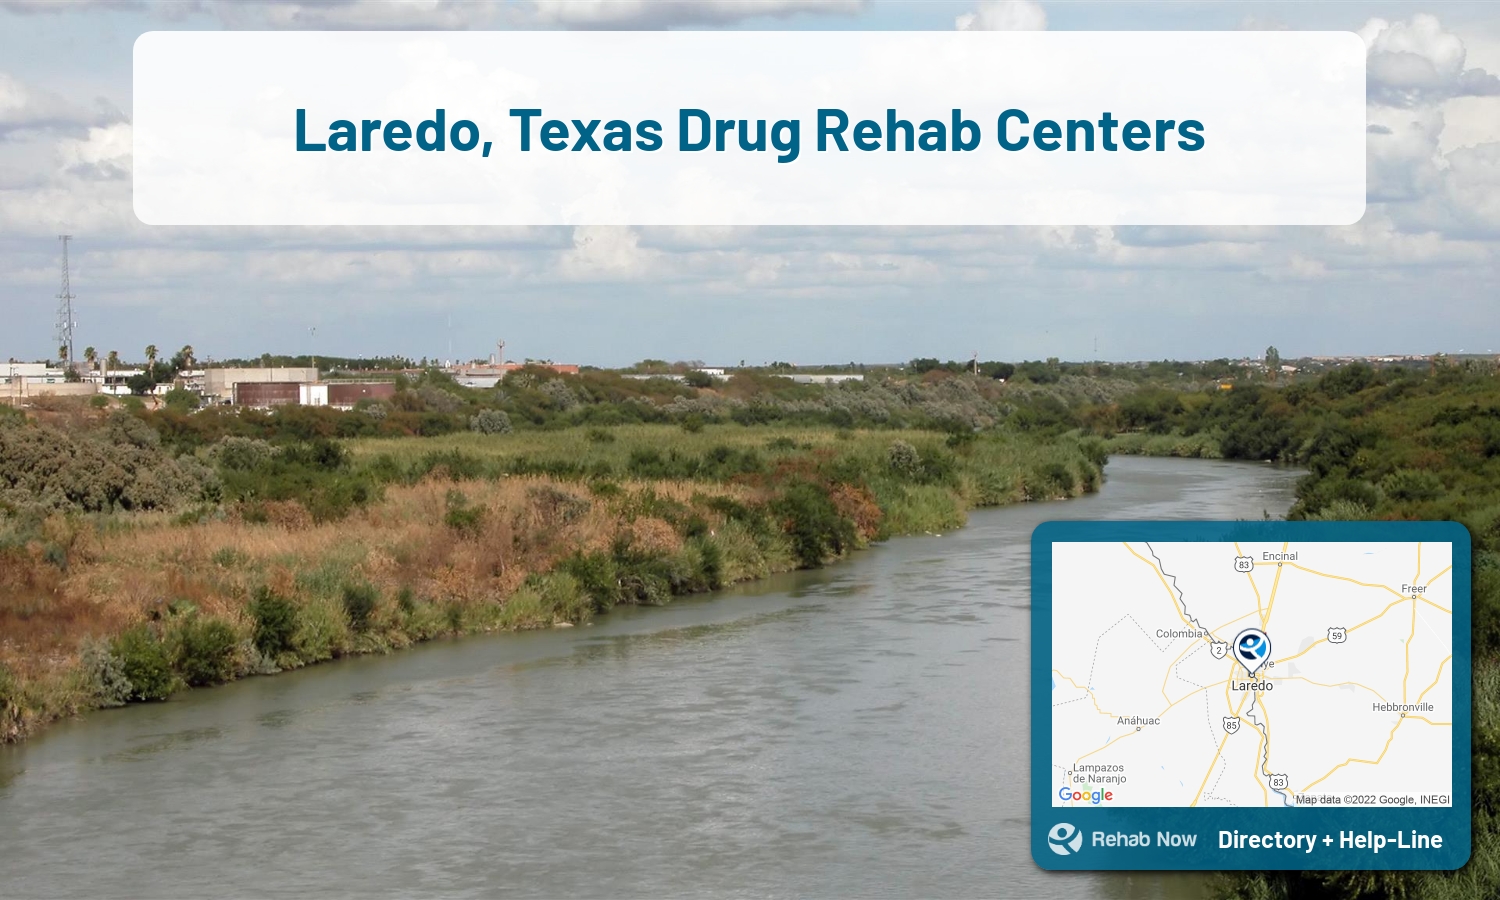 Ready to pick a rehab center in Laredo? Get off alcohol, opiates, and other drugs, by selecting top drug rehab centers in Texas